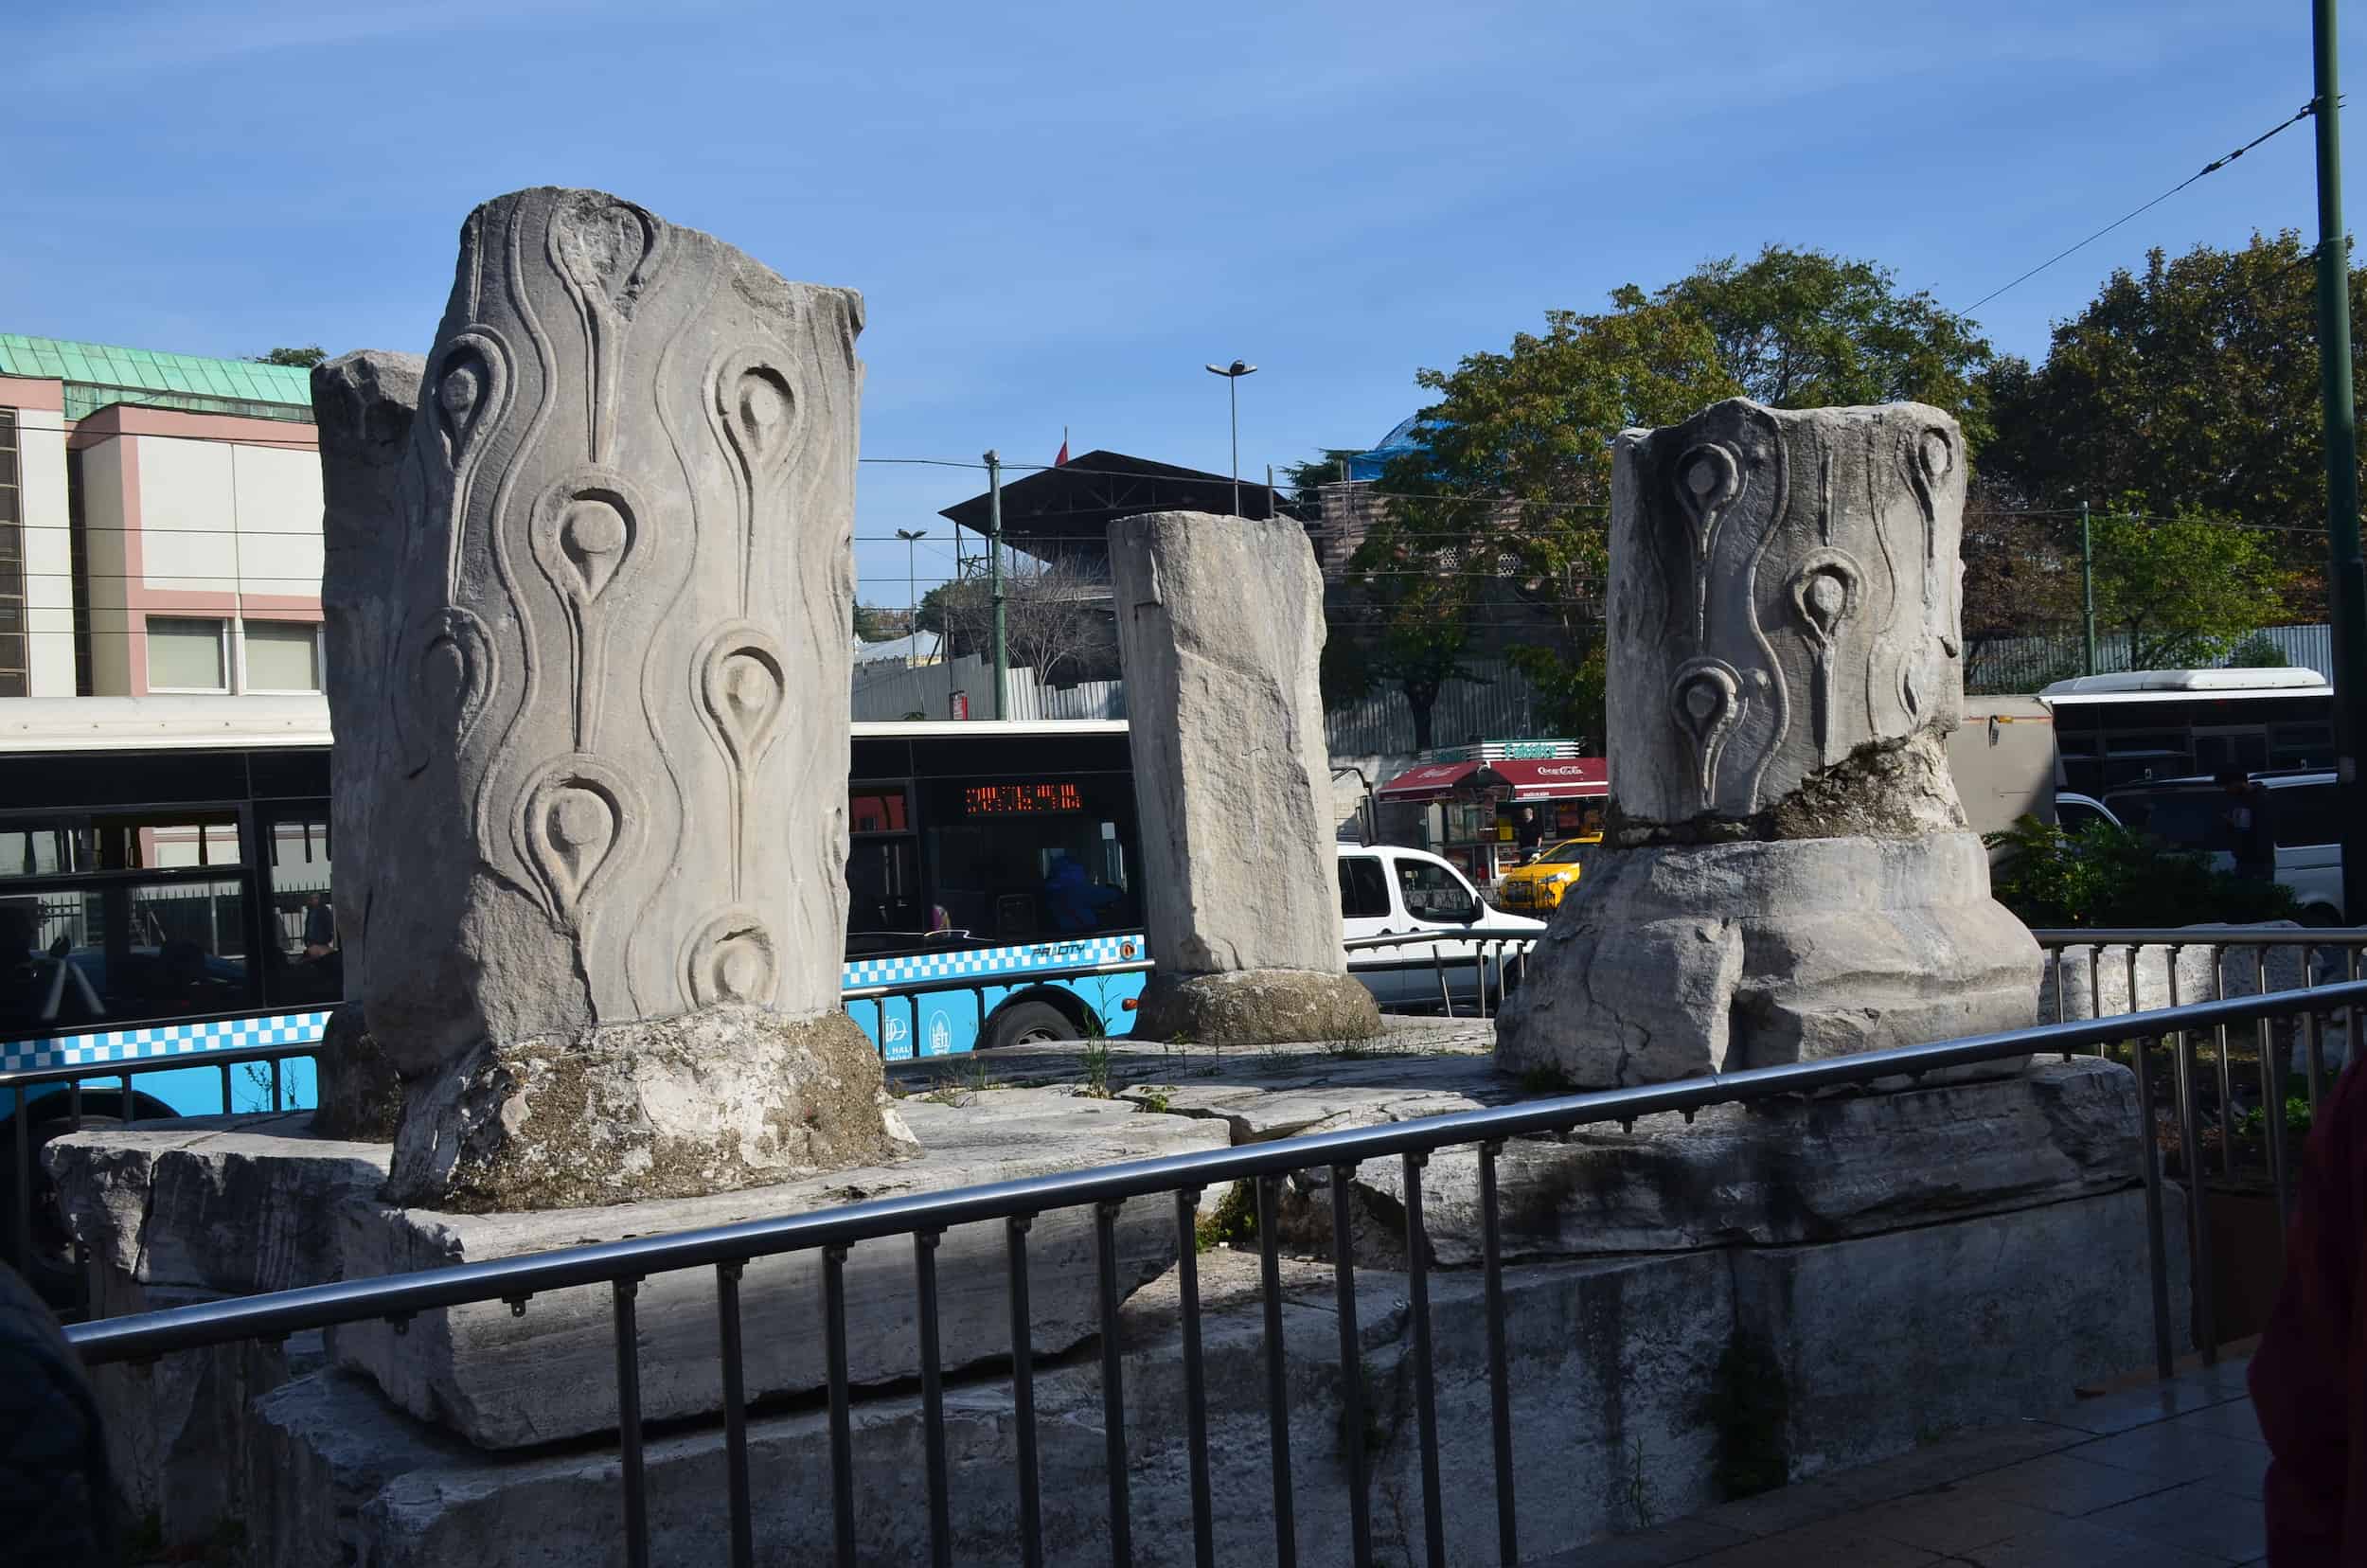 Columns from the triumphal arch at the Forum of Theodosius at Beyazıt Square in Istanbul, Turkey